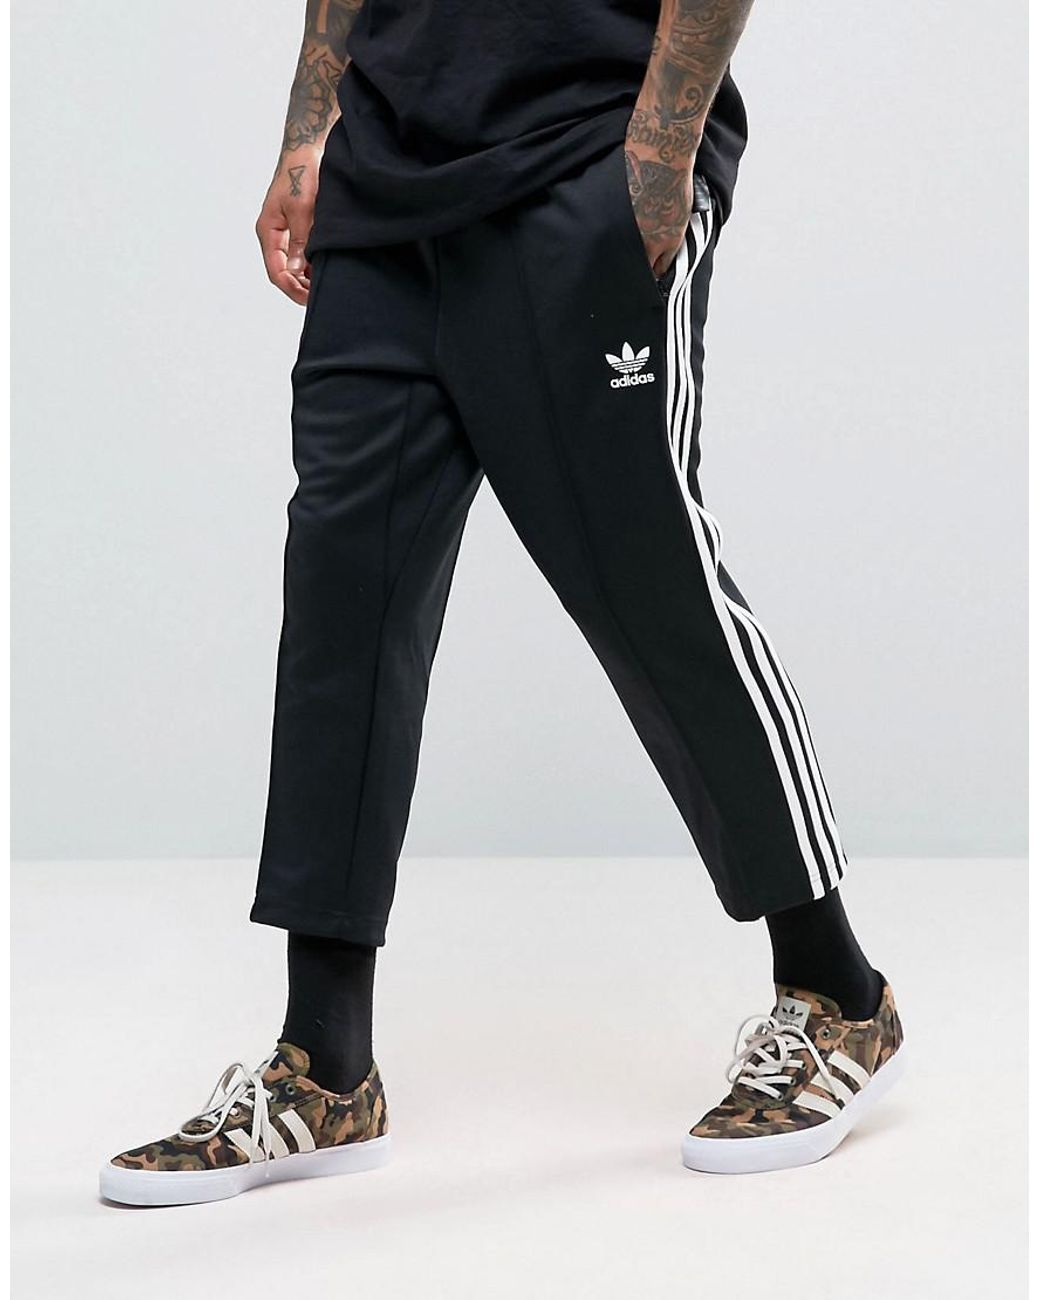 adidas  Superstar Relaxed Cropped Track Pants  Adidas women Track pants  mens Pants